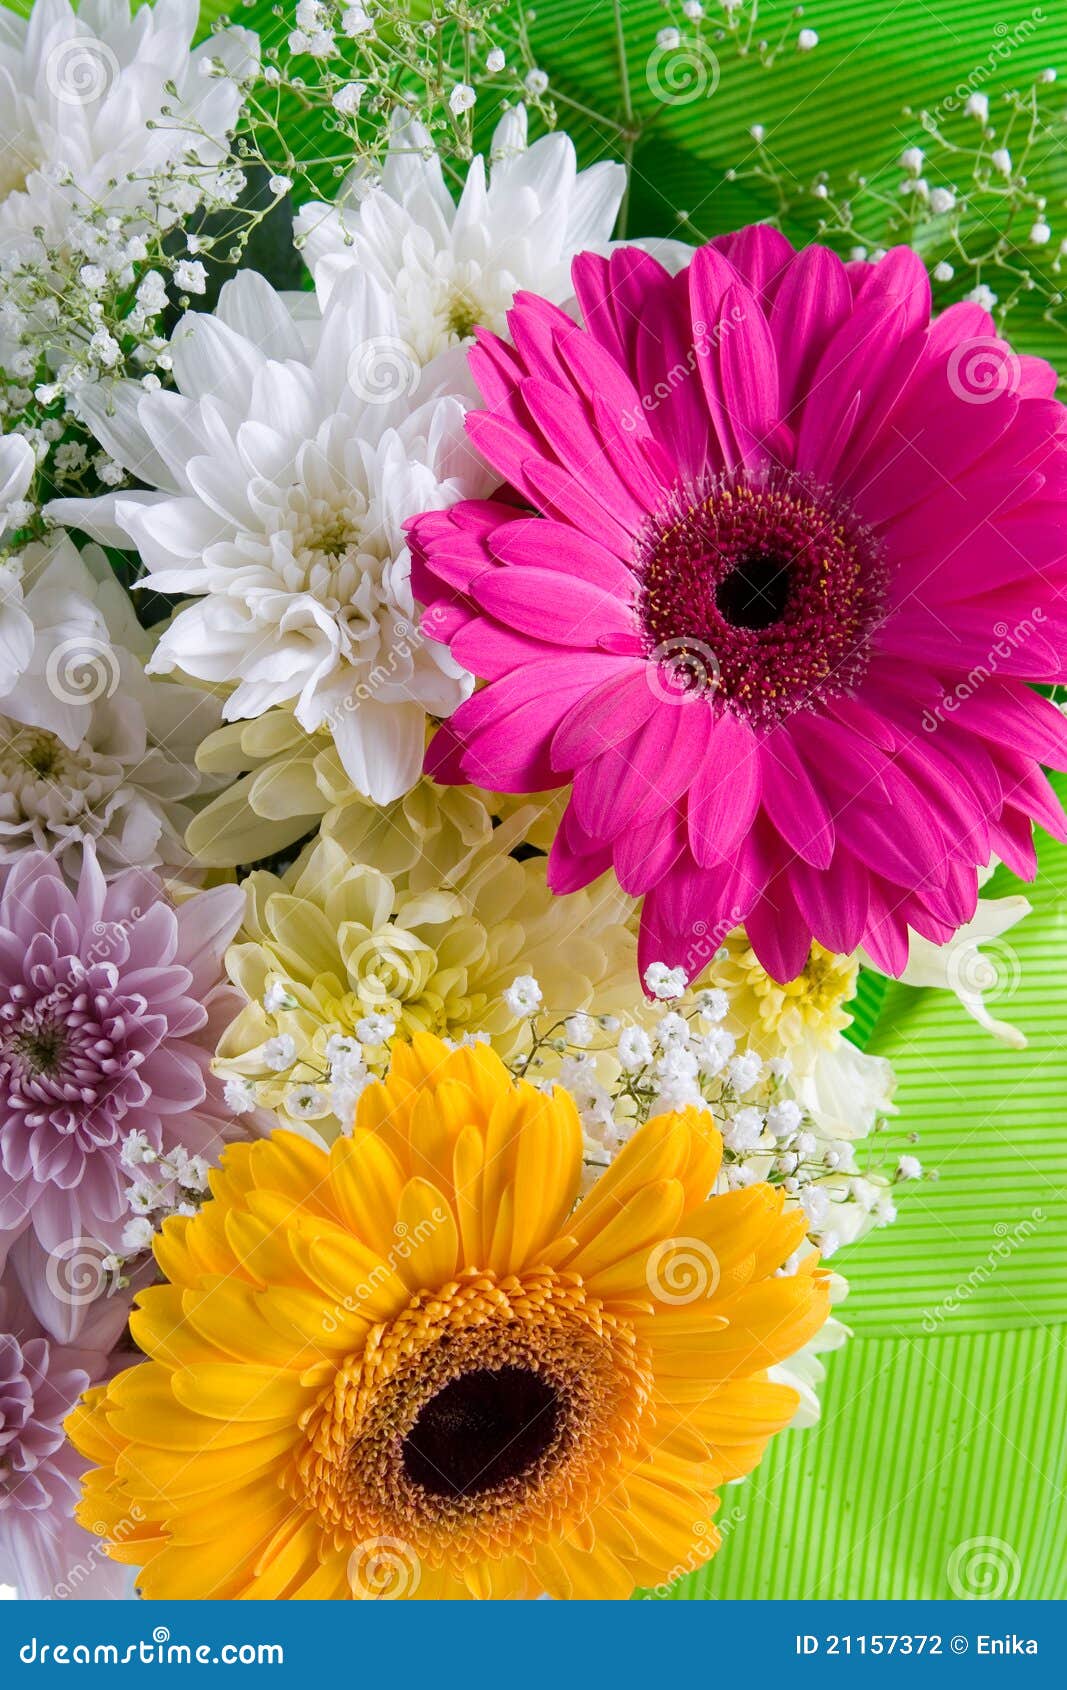 Bouquet of Beautiful Flowers Stock Photo - Image of nature, flower: 21157372